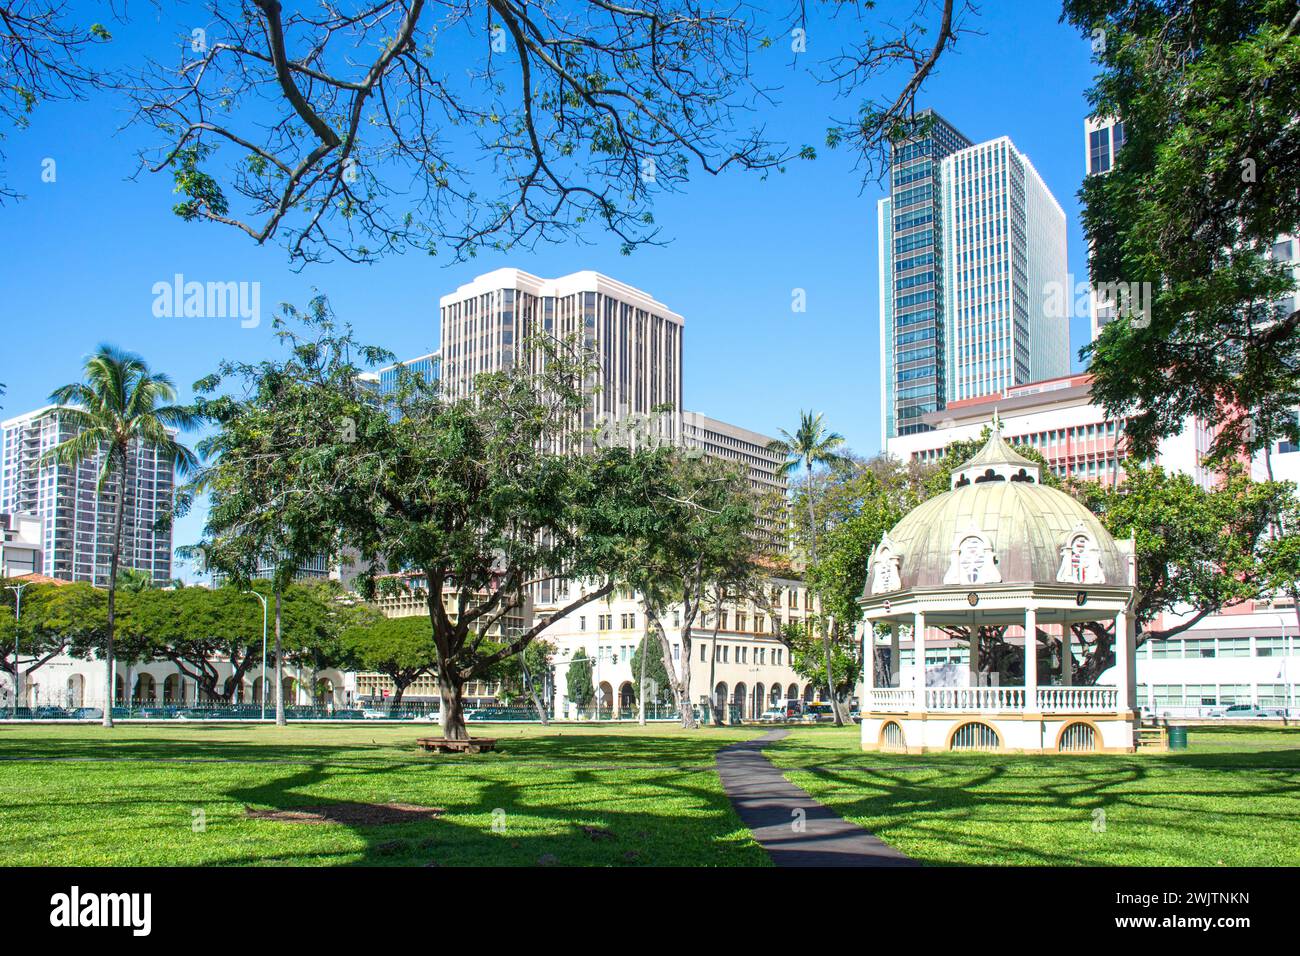 Business district from Iolani Palace grounds, Honolulu, Oahu, Hawaii, United States of America Stock Photo